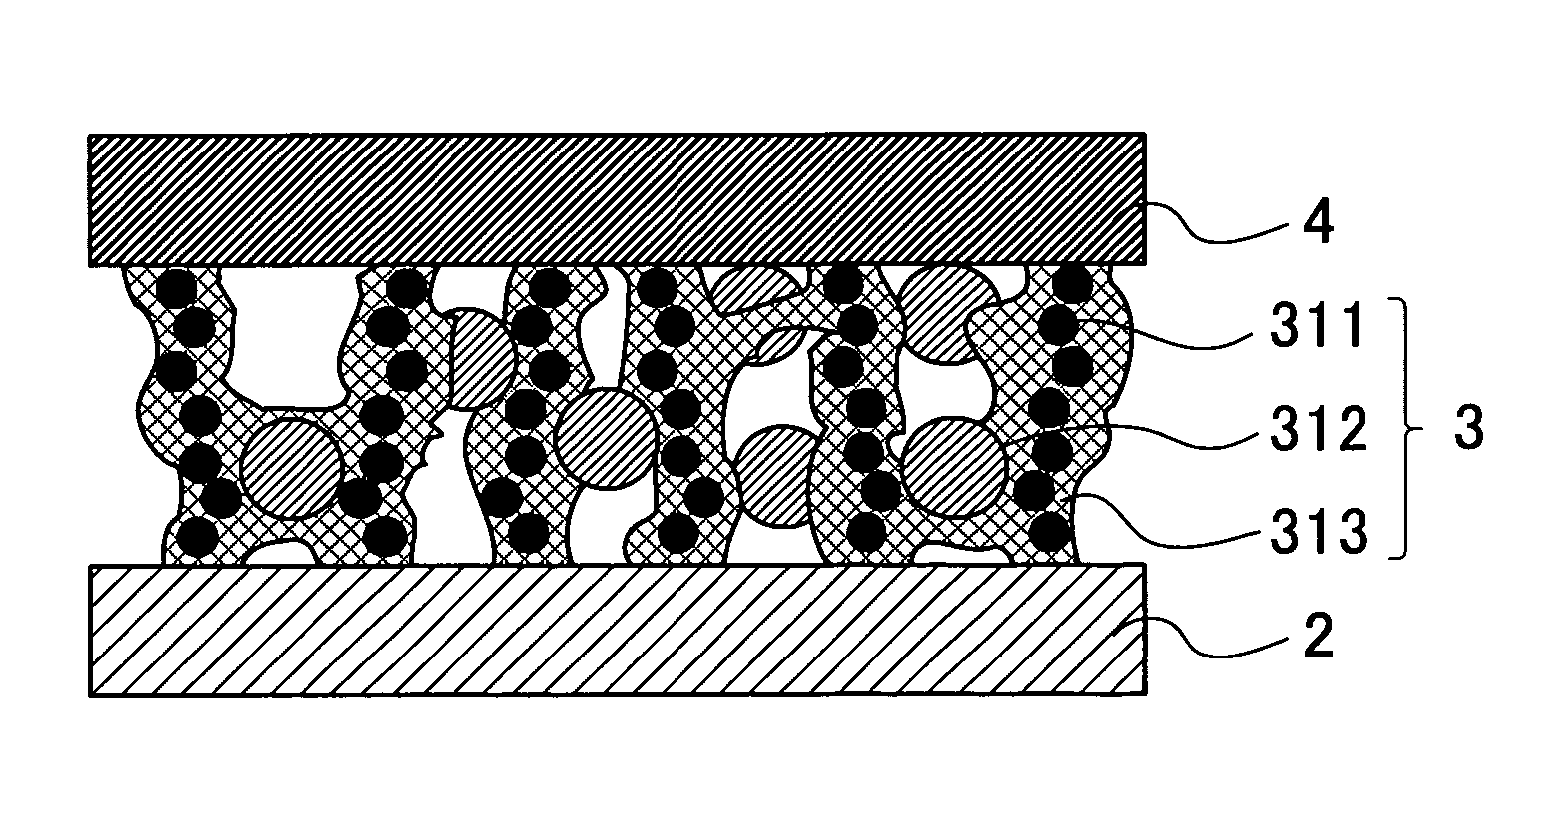 Solid polymer electrolyte fuel cell and method for manufacturing the same